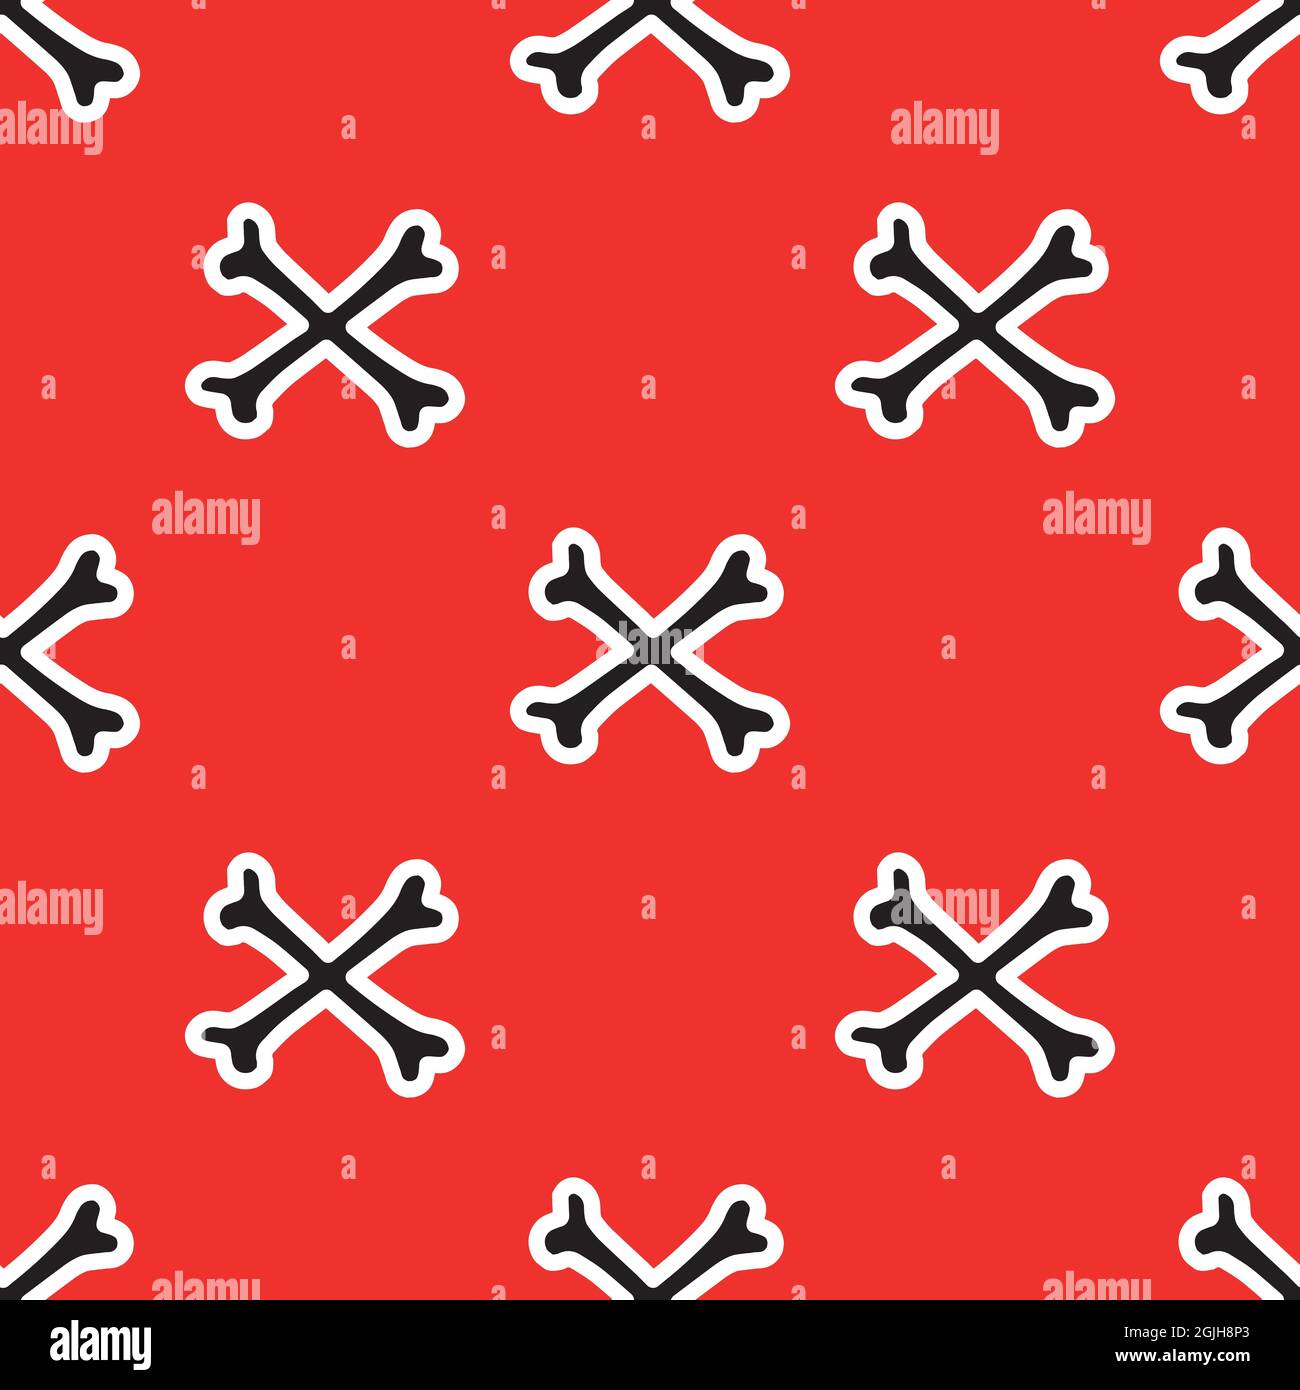 Seamless pattern with bones on a red background.  Stock Vector